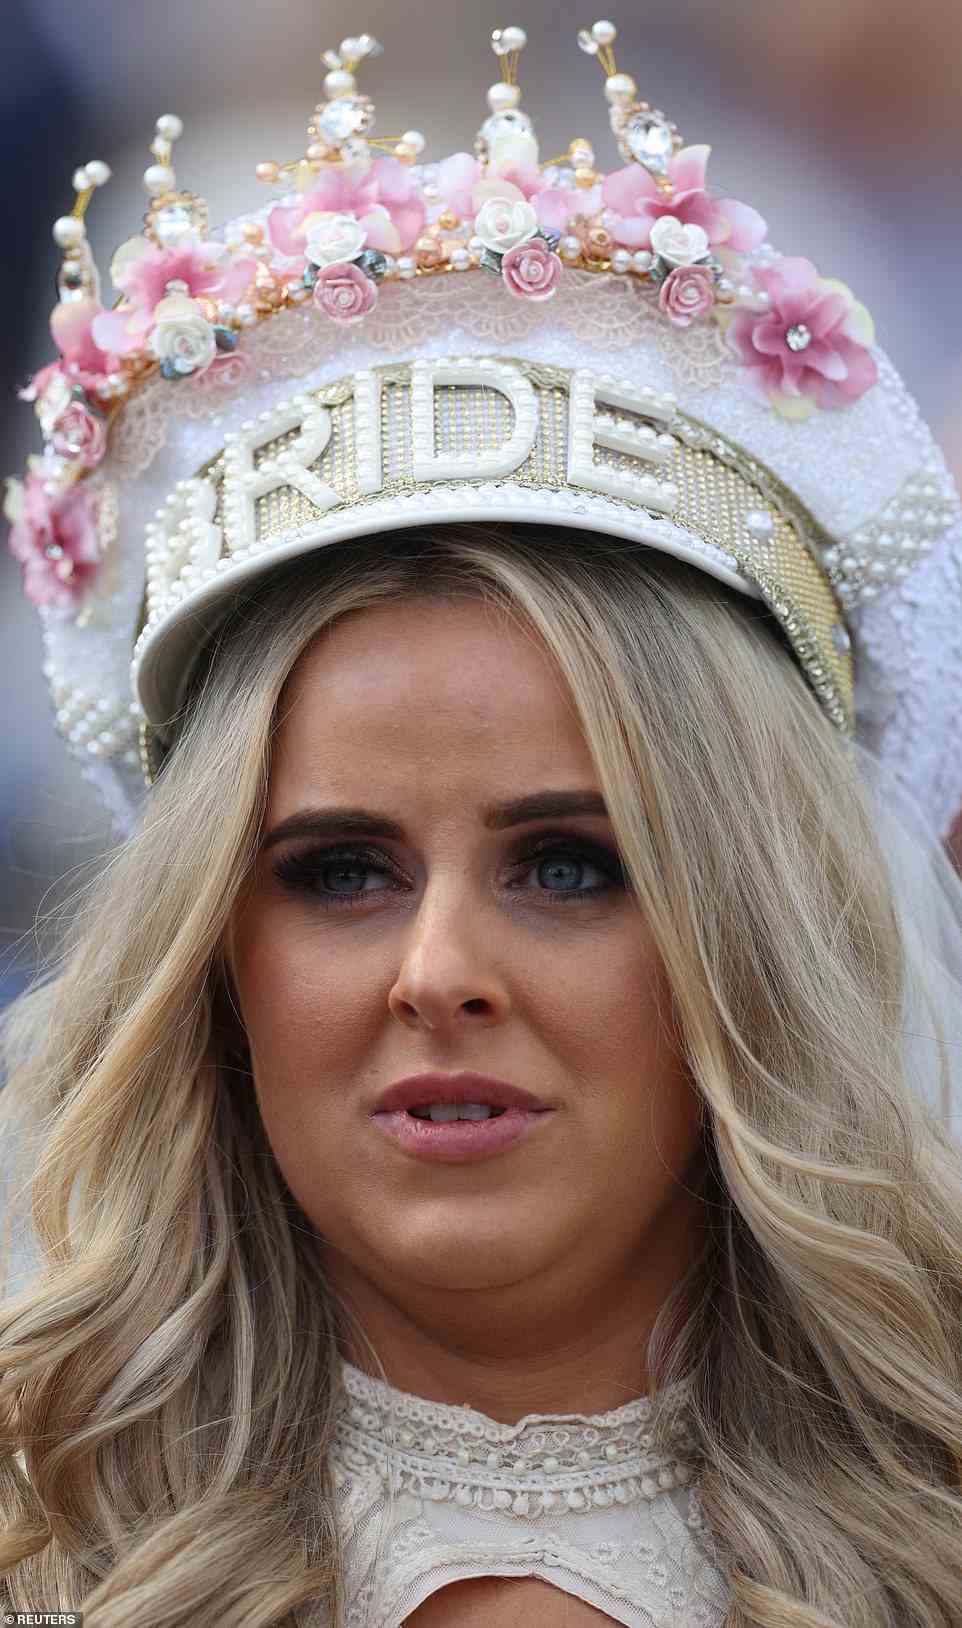 One woman seemed to be celebrating more than horse racing today, wearing a lavish beaded headpiece that says 'bride'